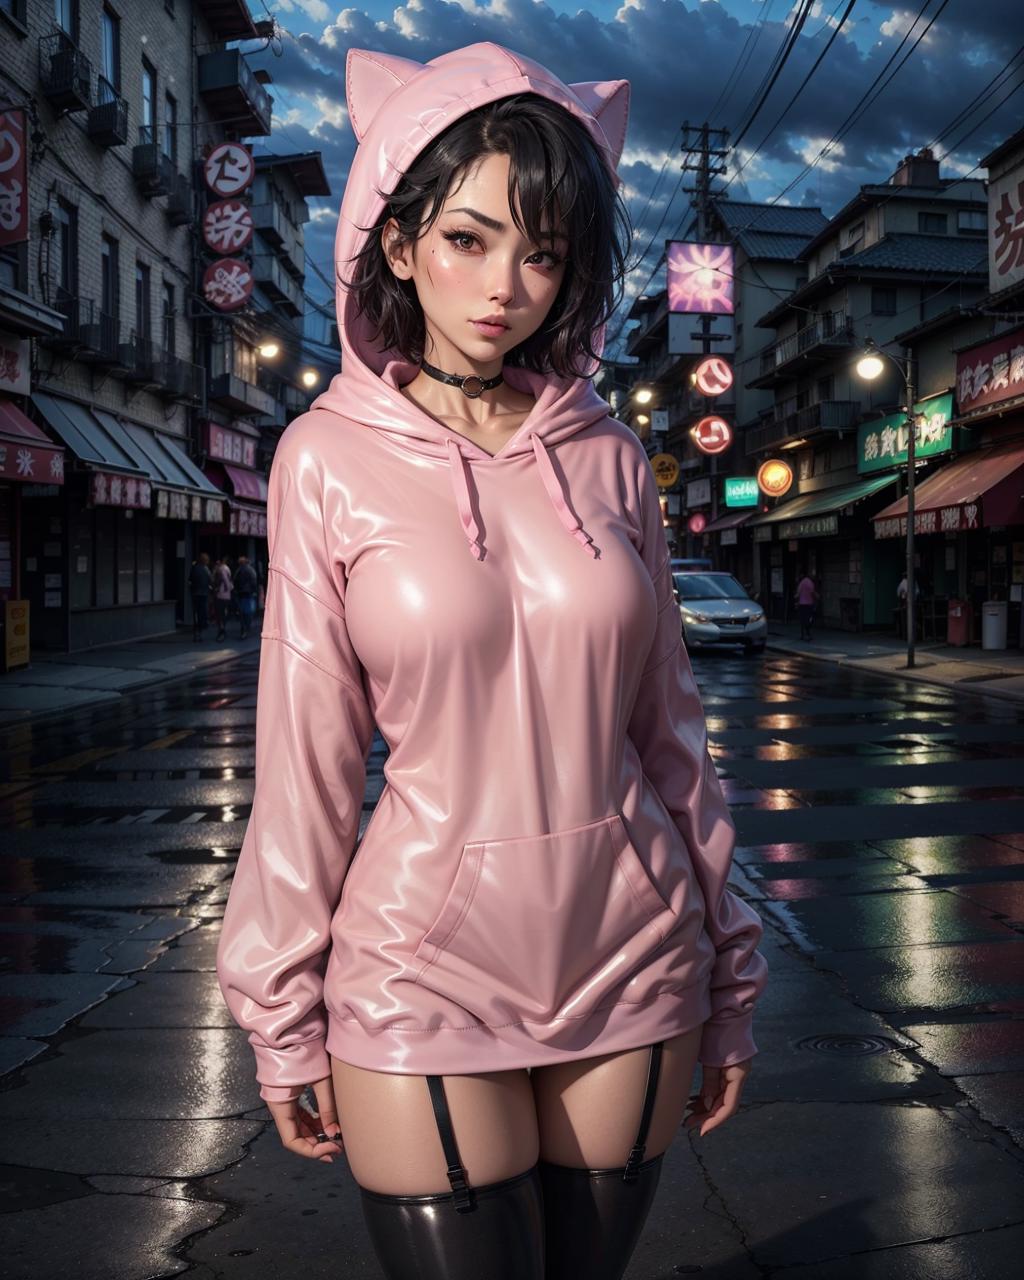 Oversized Clothing Collection image by mp92790